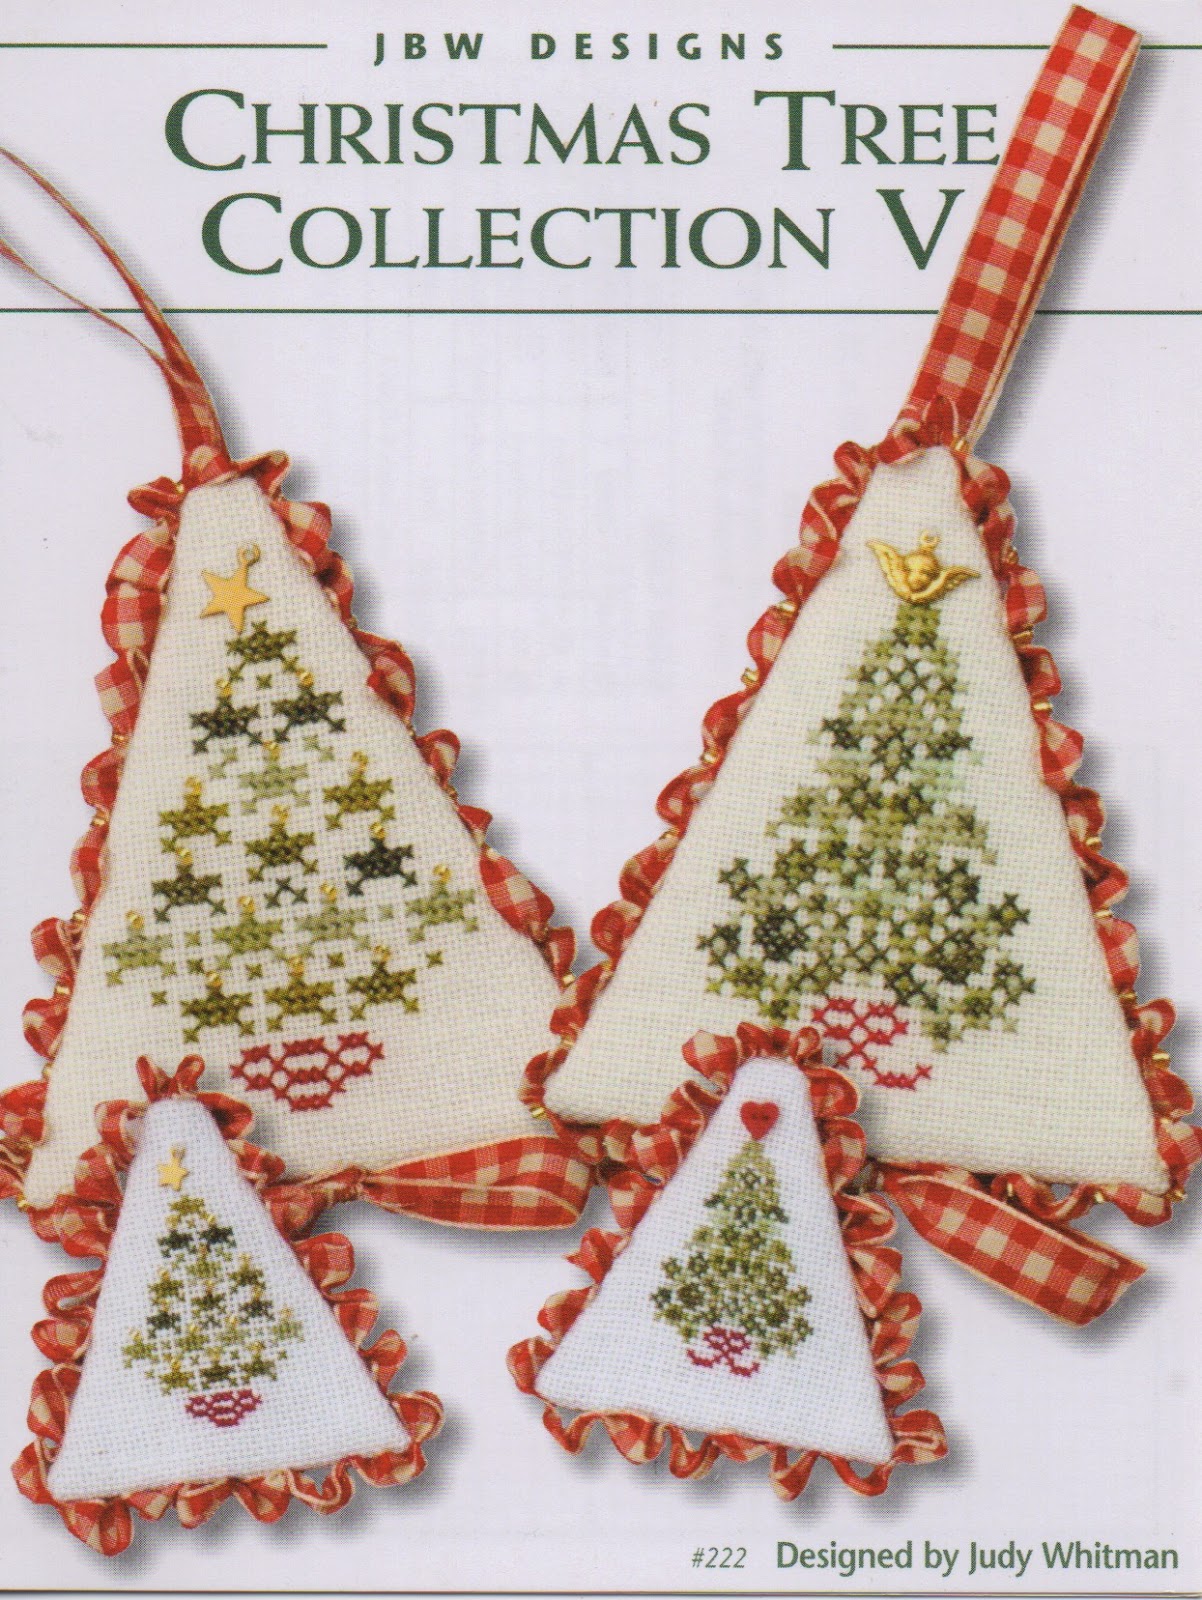 #222 Christmas Tree Collection V   by JBW Designs